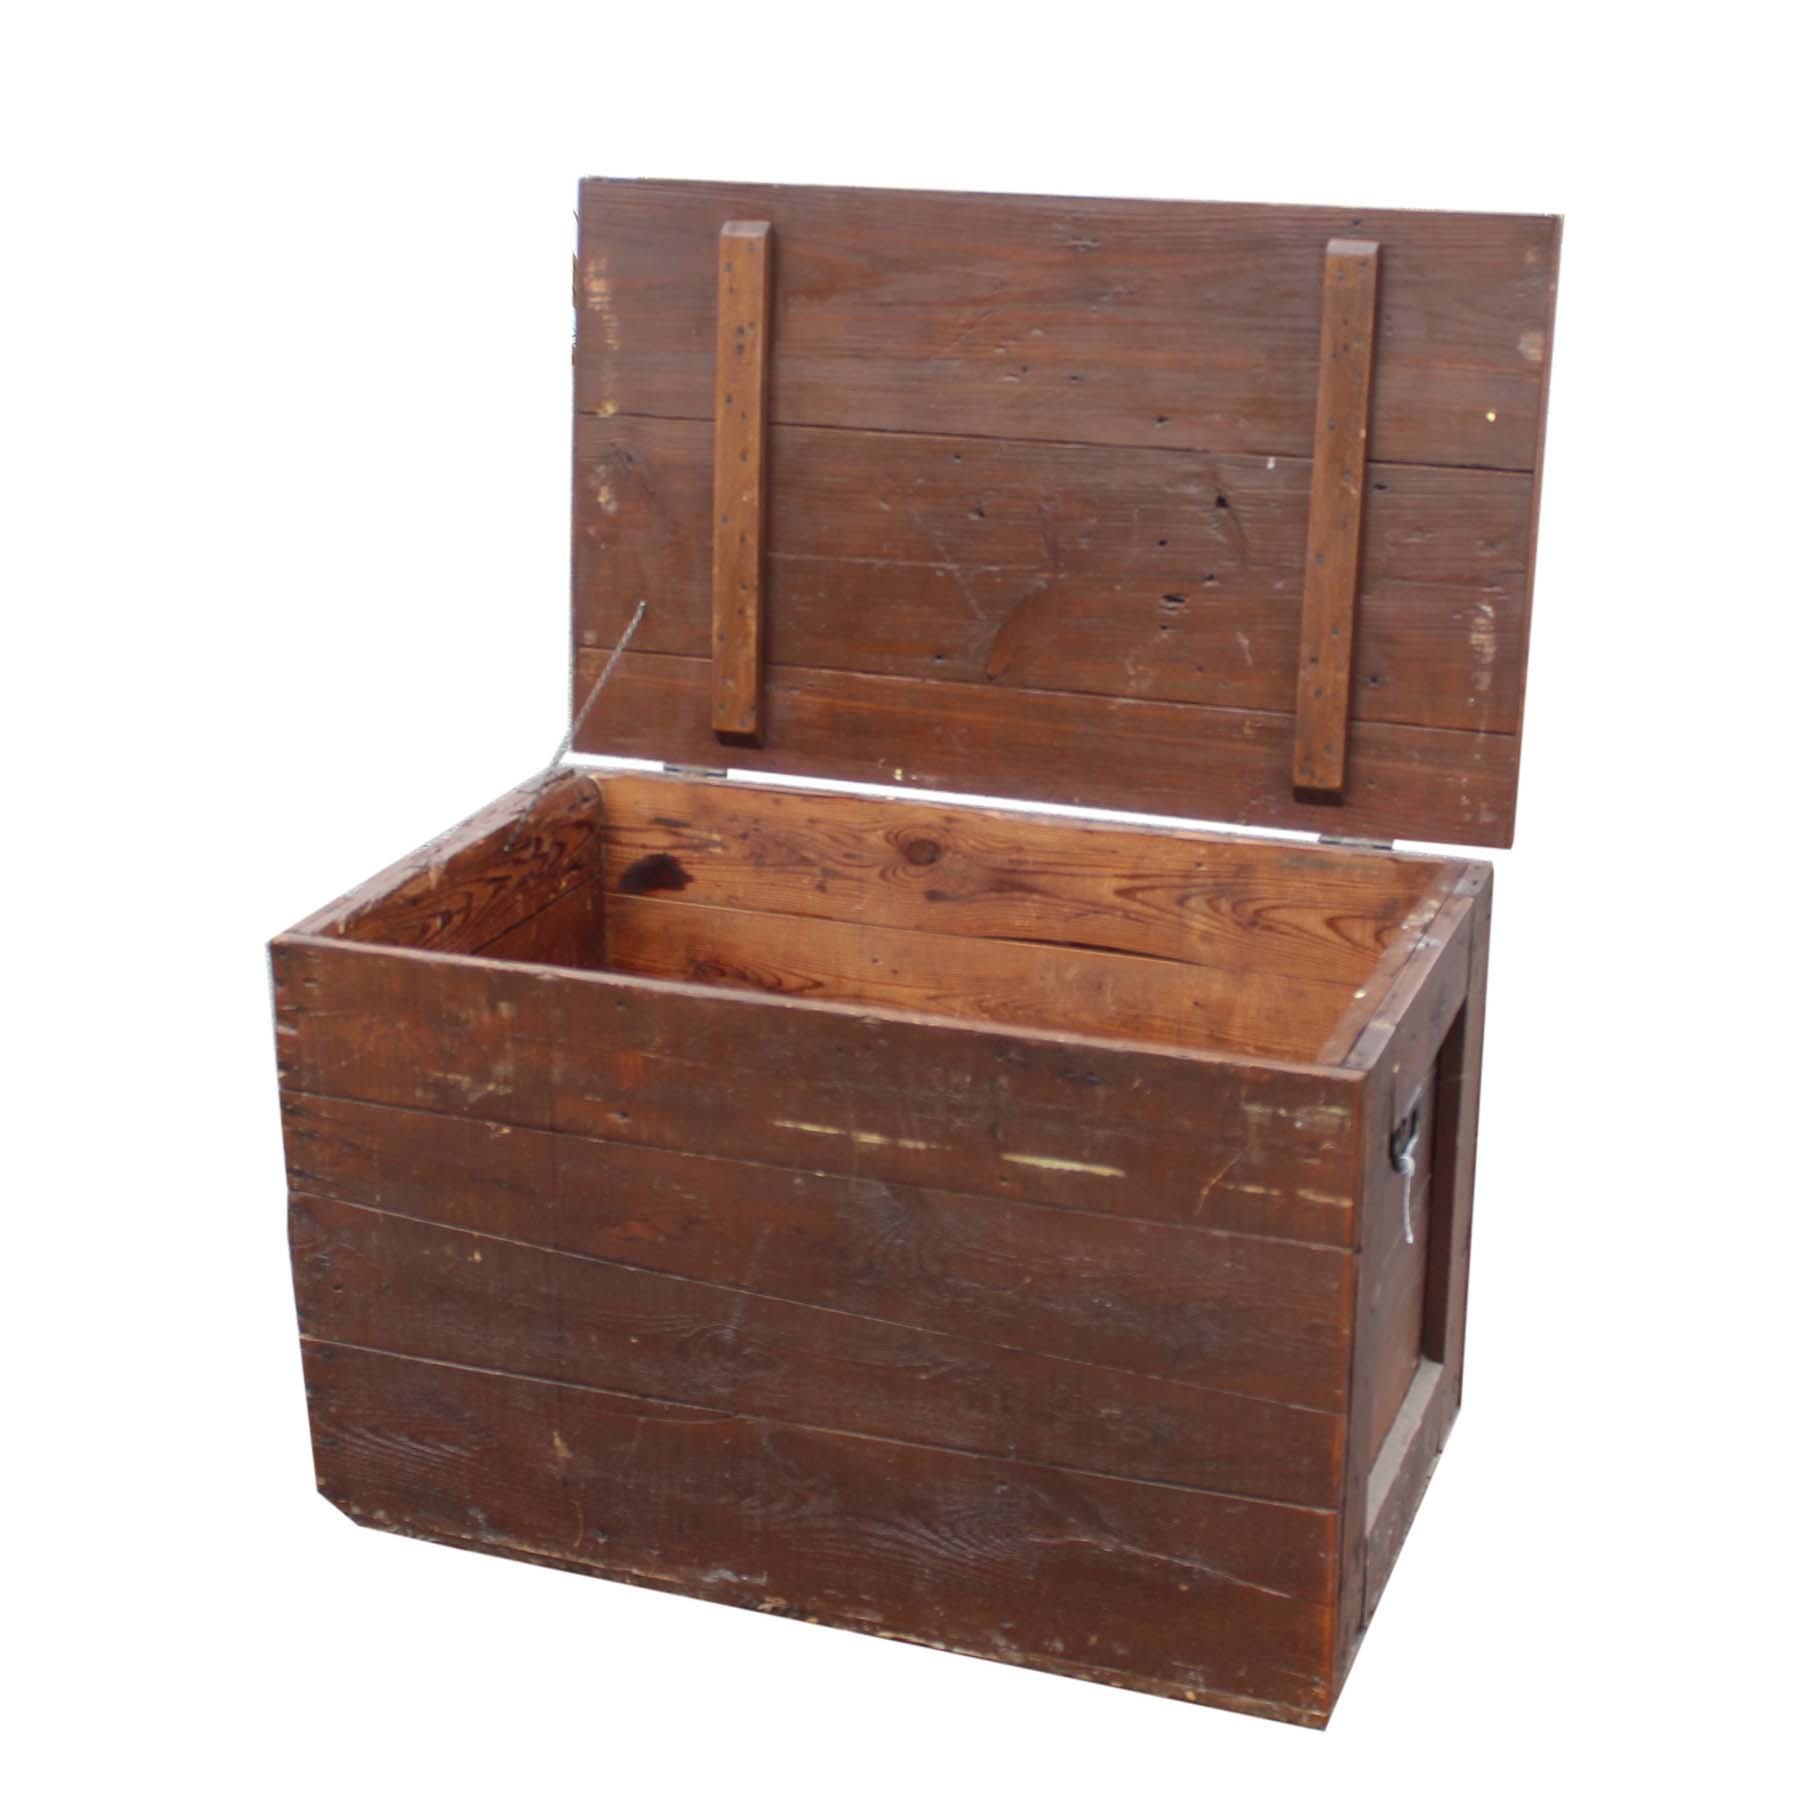 Reclaimed Antique Wood Trunk-70263